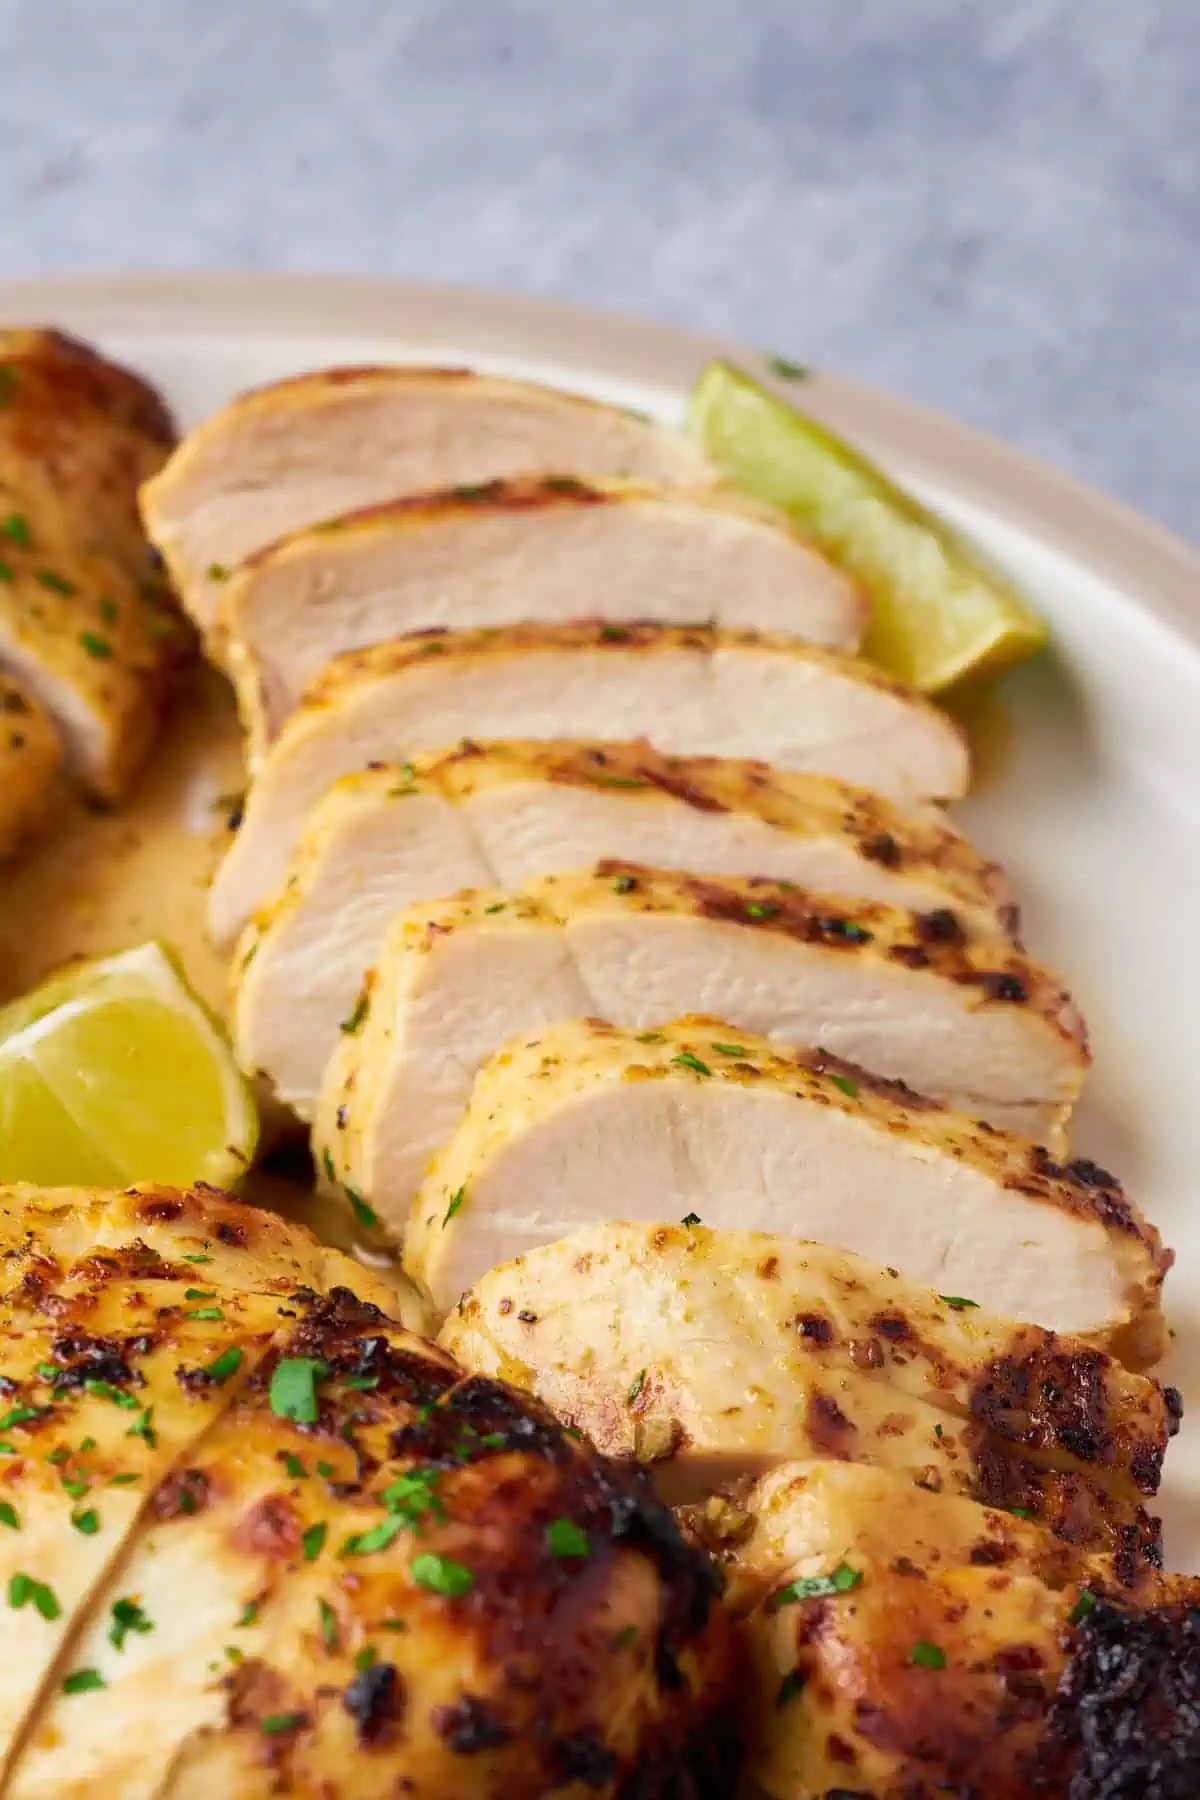 Sliced juicy marinated chicken breast after cooking.